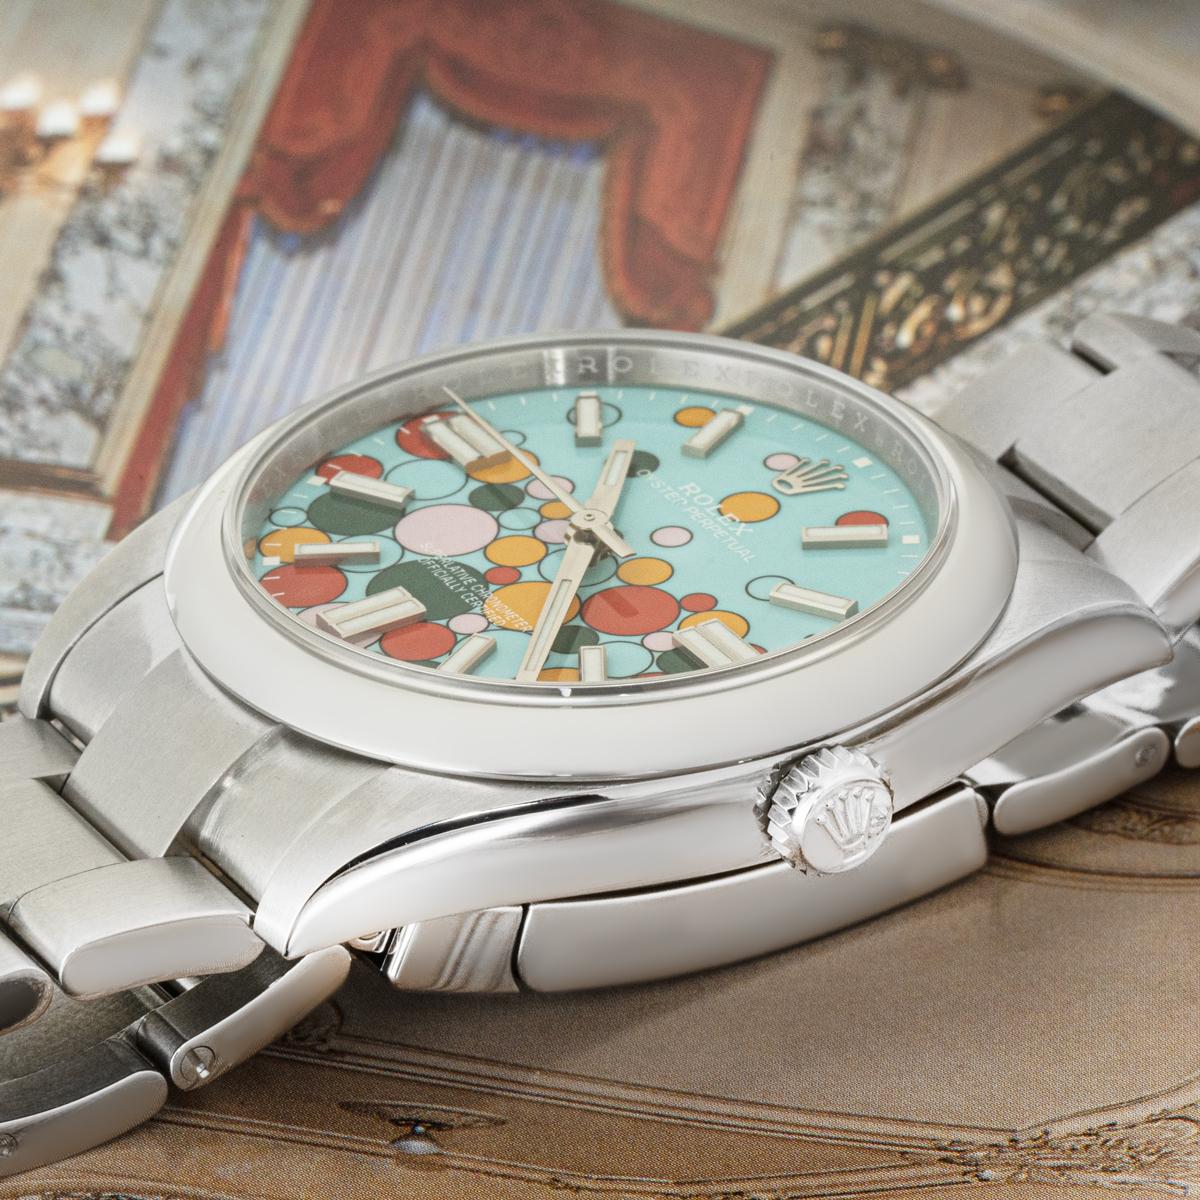 A 41mm Oyster Perpetual from Rolex in Oystersteel. Featuring the Celebration motif dial which has various-sized bubbles in candy pink, yellow, coral red and green against a turquoise blue background which is a reminder of the coloured dials